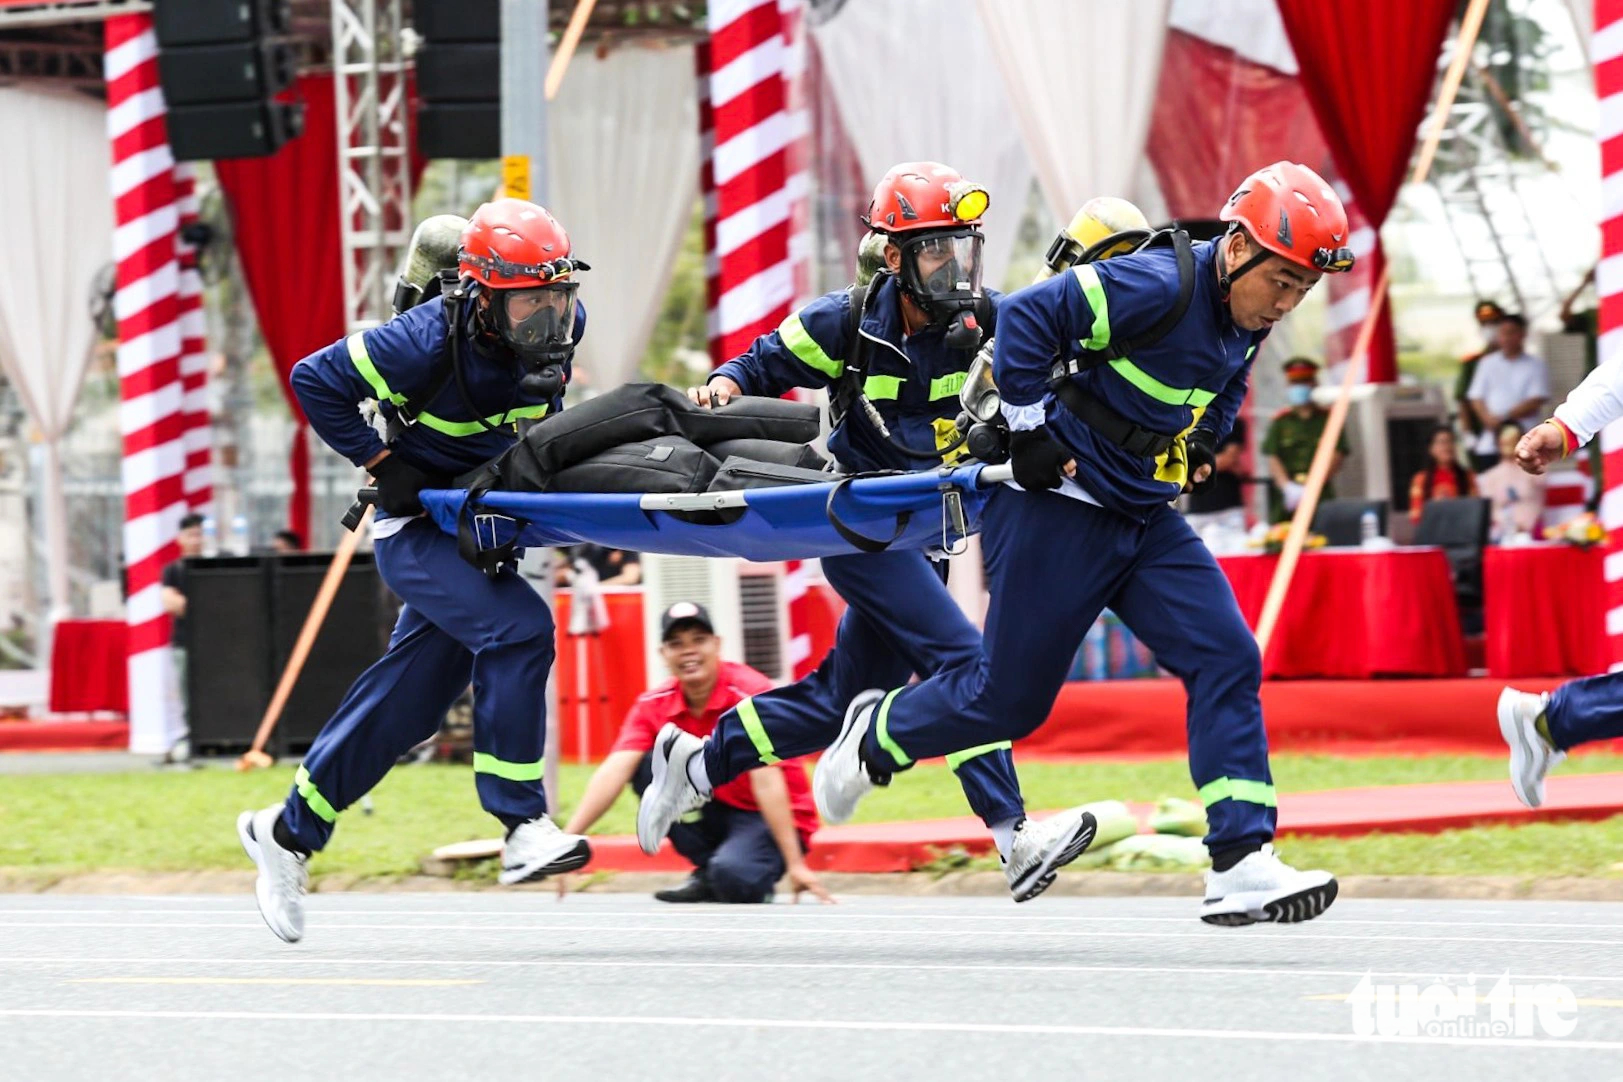 600 contestants join national rescue competition in Ho Chi Minh City